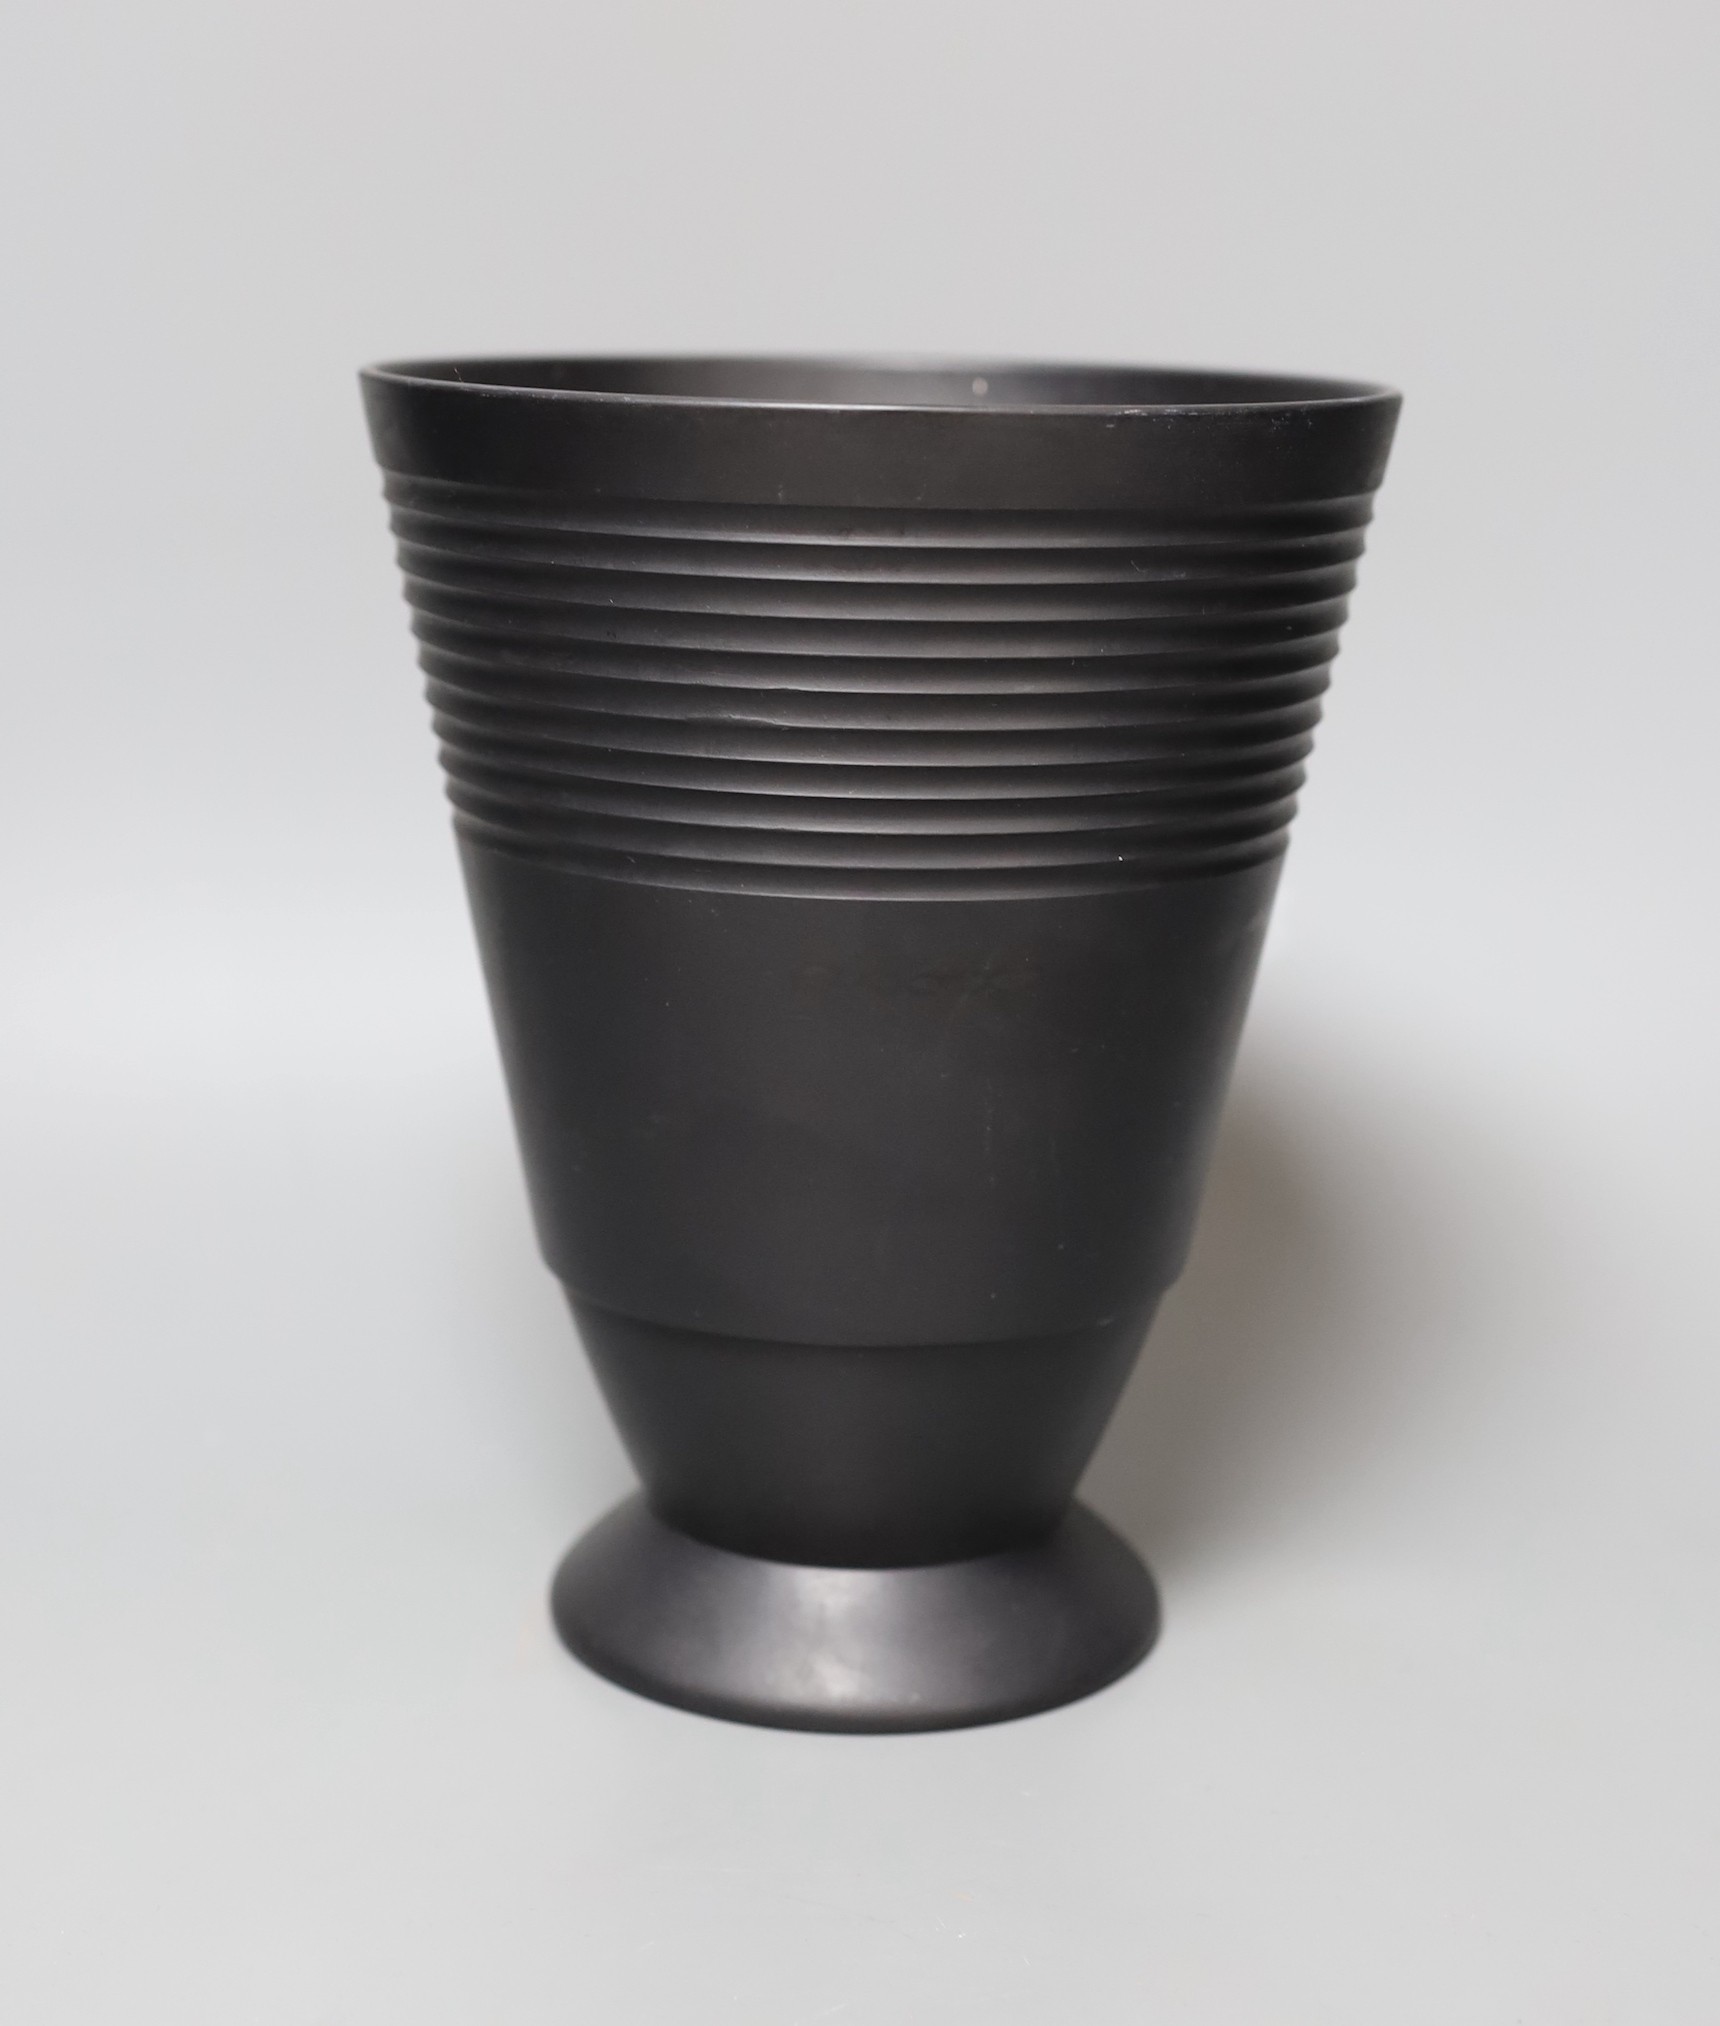 An unusual Keith Murray for Wedgwood vase - flared and ribbed black basalt, 20cm high